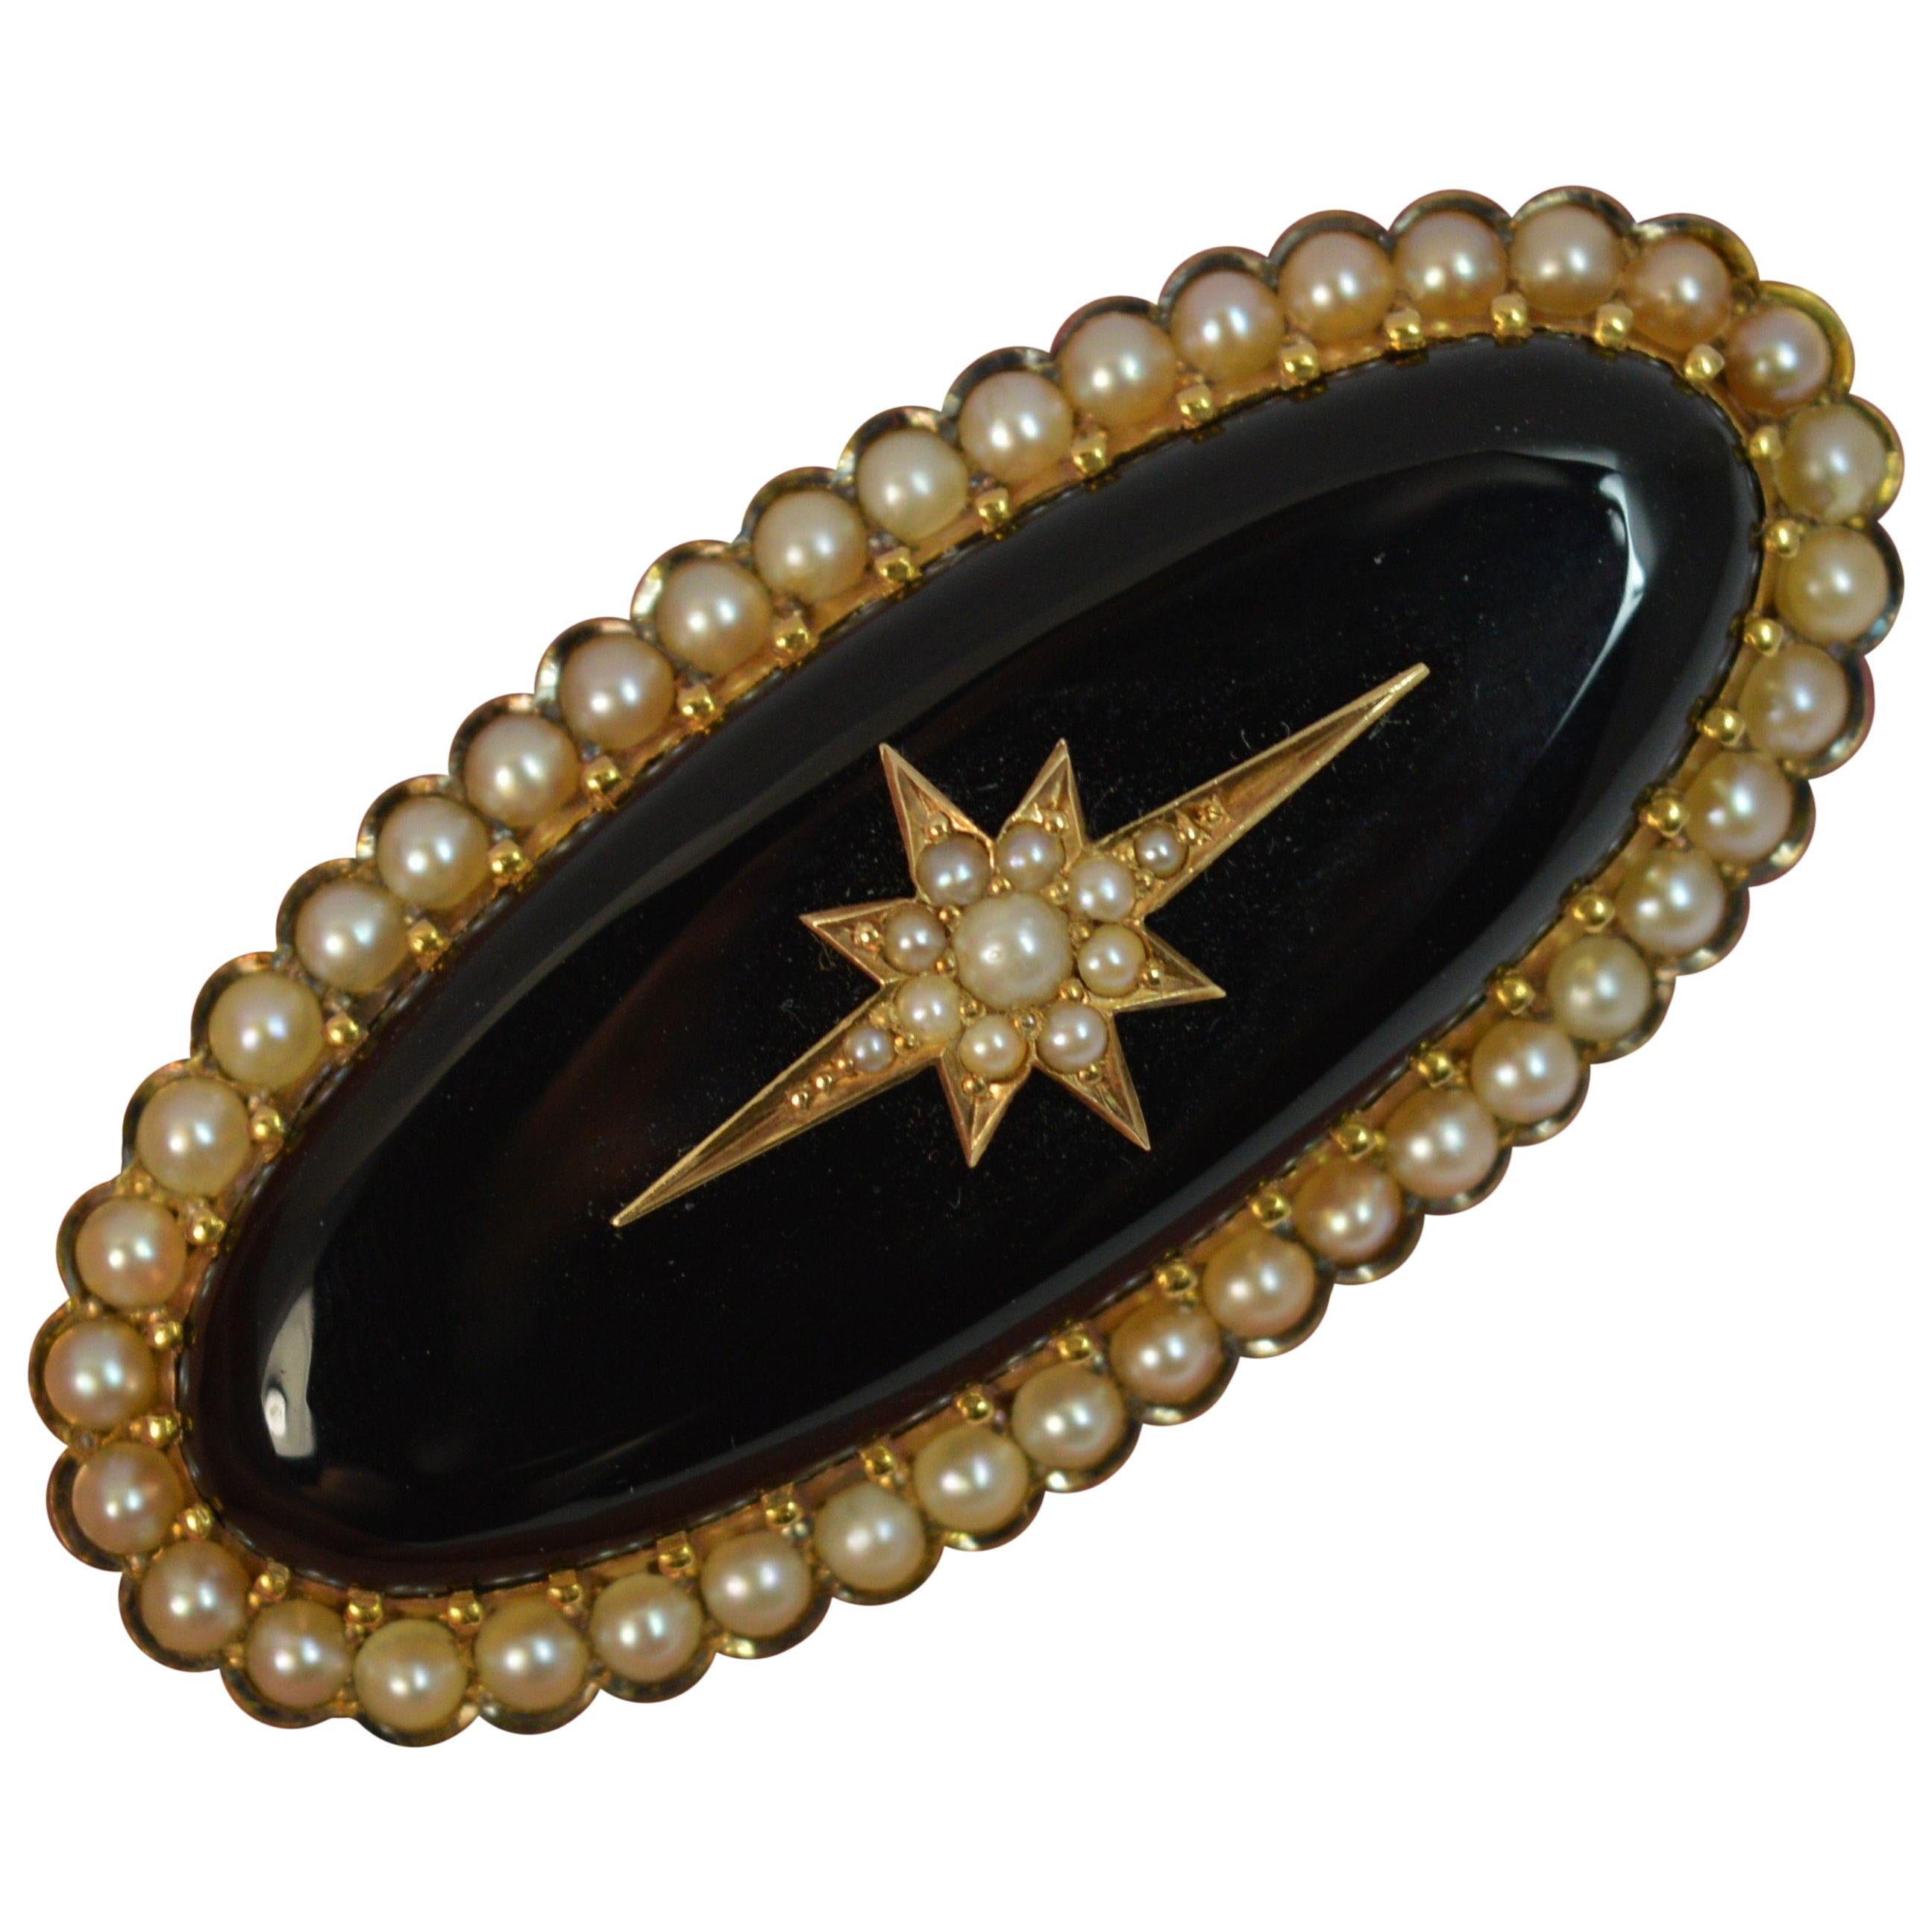 Victorian 15 Carat Gold Onyx and Seed Pearl Brooch